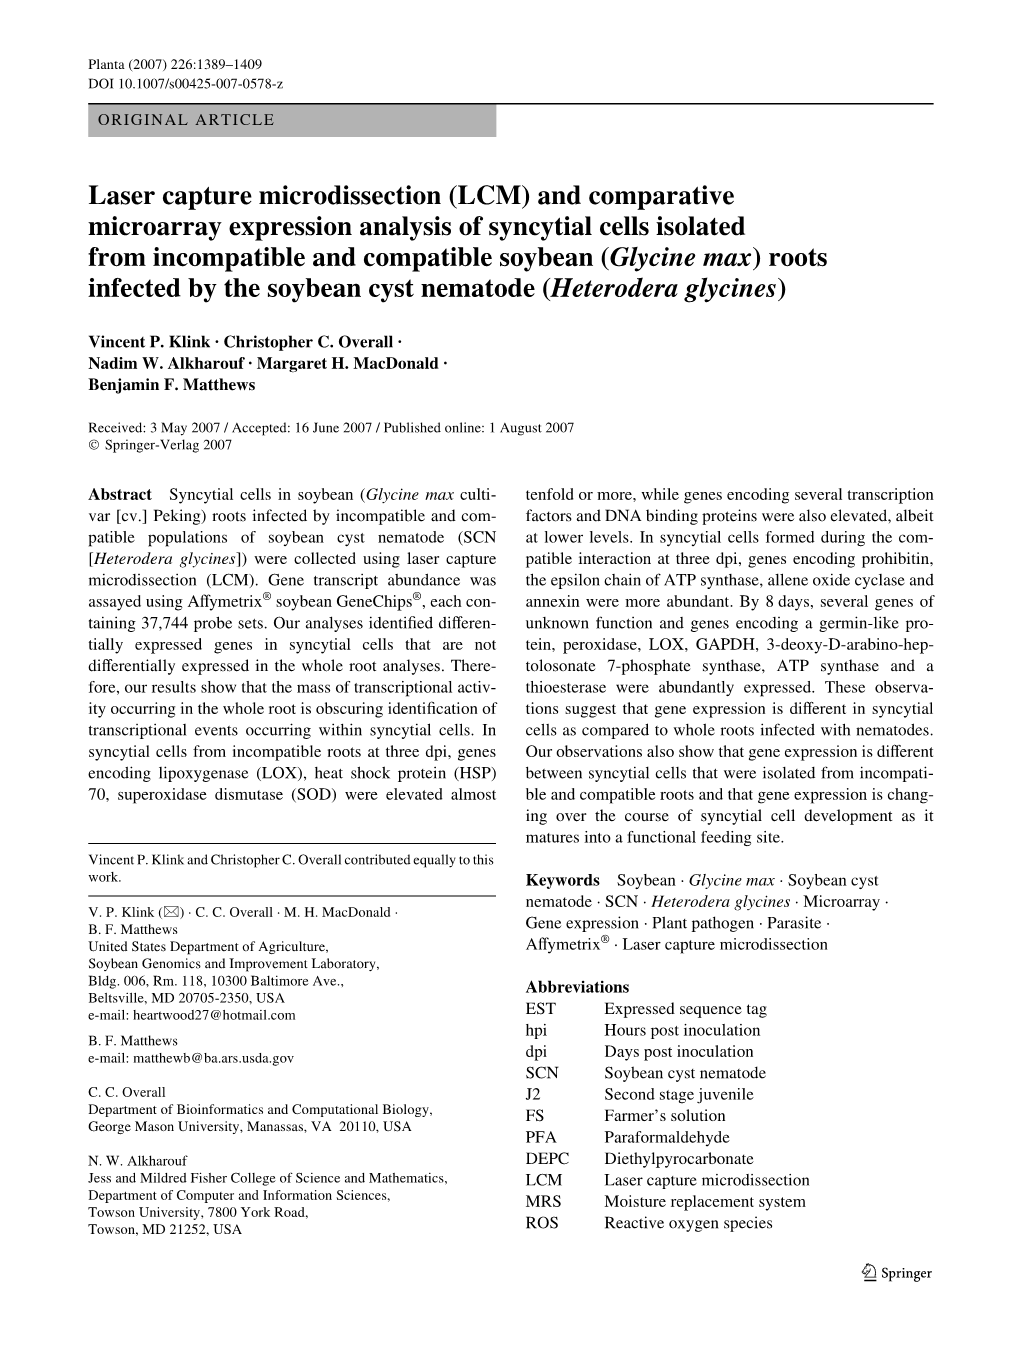 Laser Capture Microdissection (LCM) and Comparative